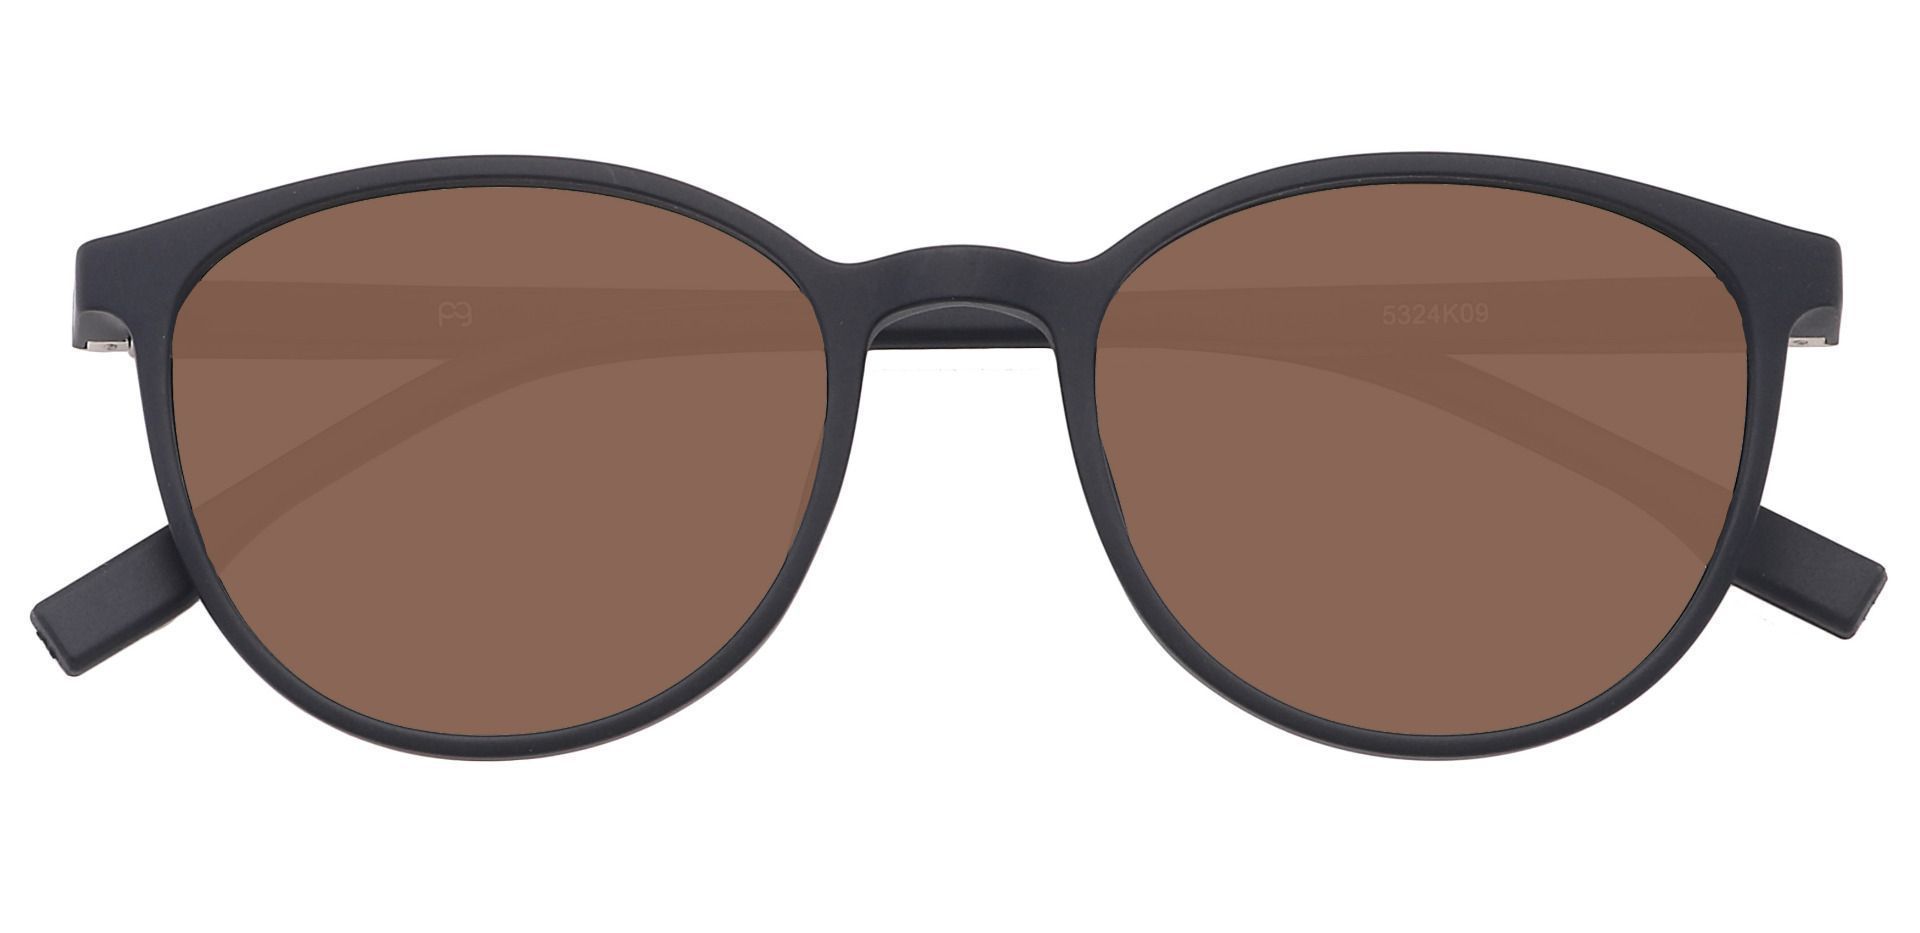 Bay Round Lined Bifocal Sunglasses - Black Frame With Brown Lenses